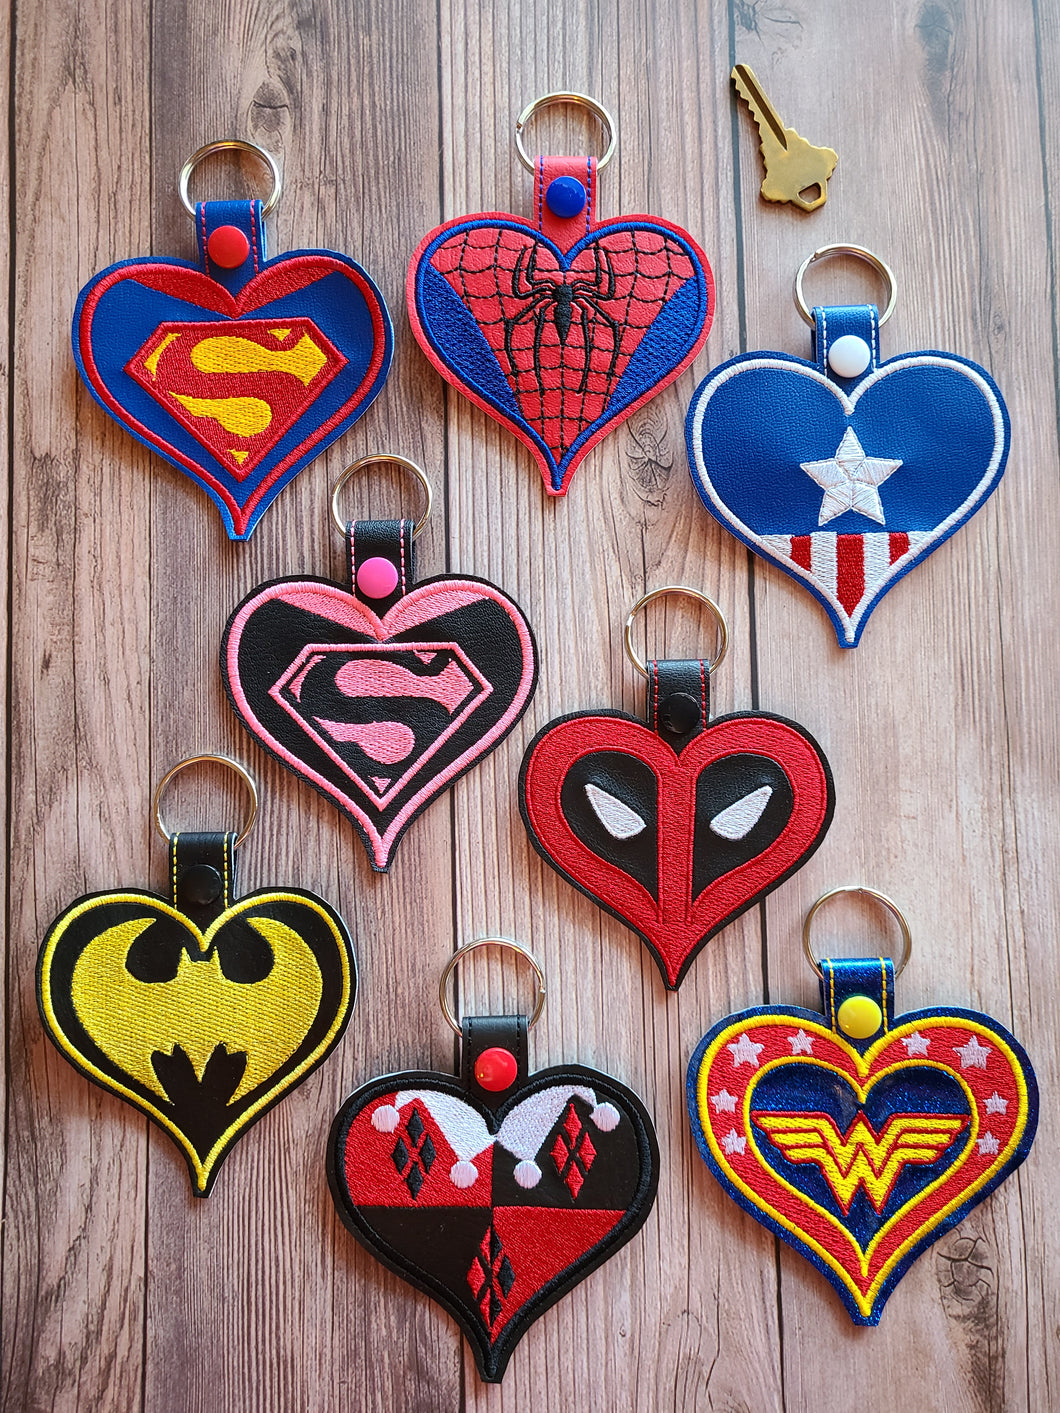 Heart Key Fobs Inspired By Superhero Characters - Keychains - Backpack Decoration - Bag Bling